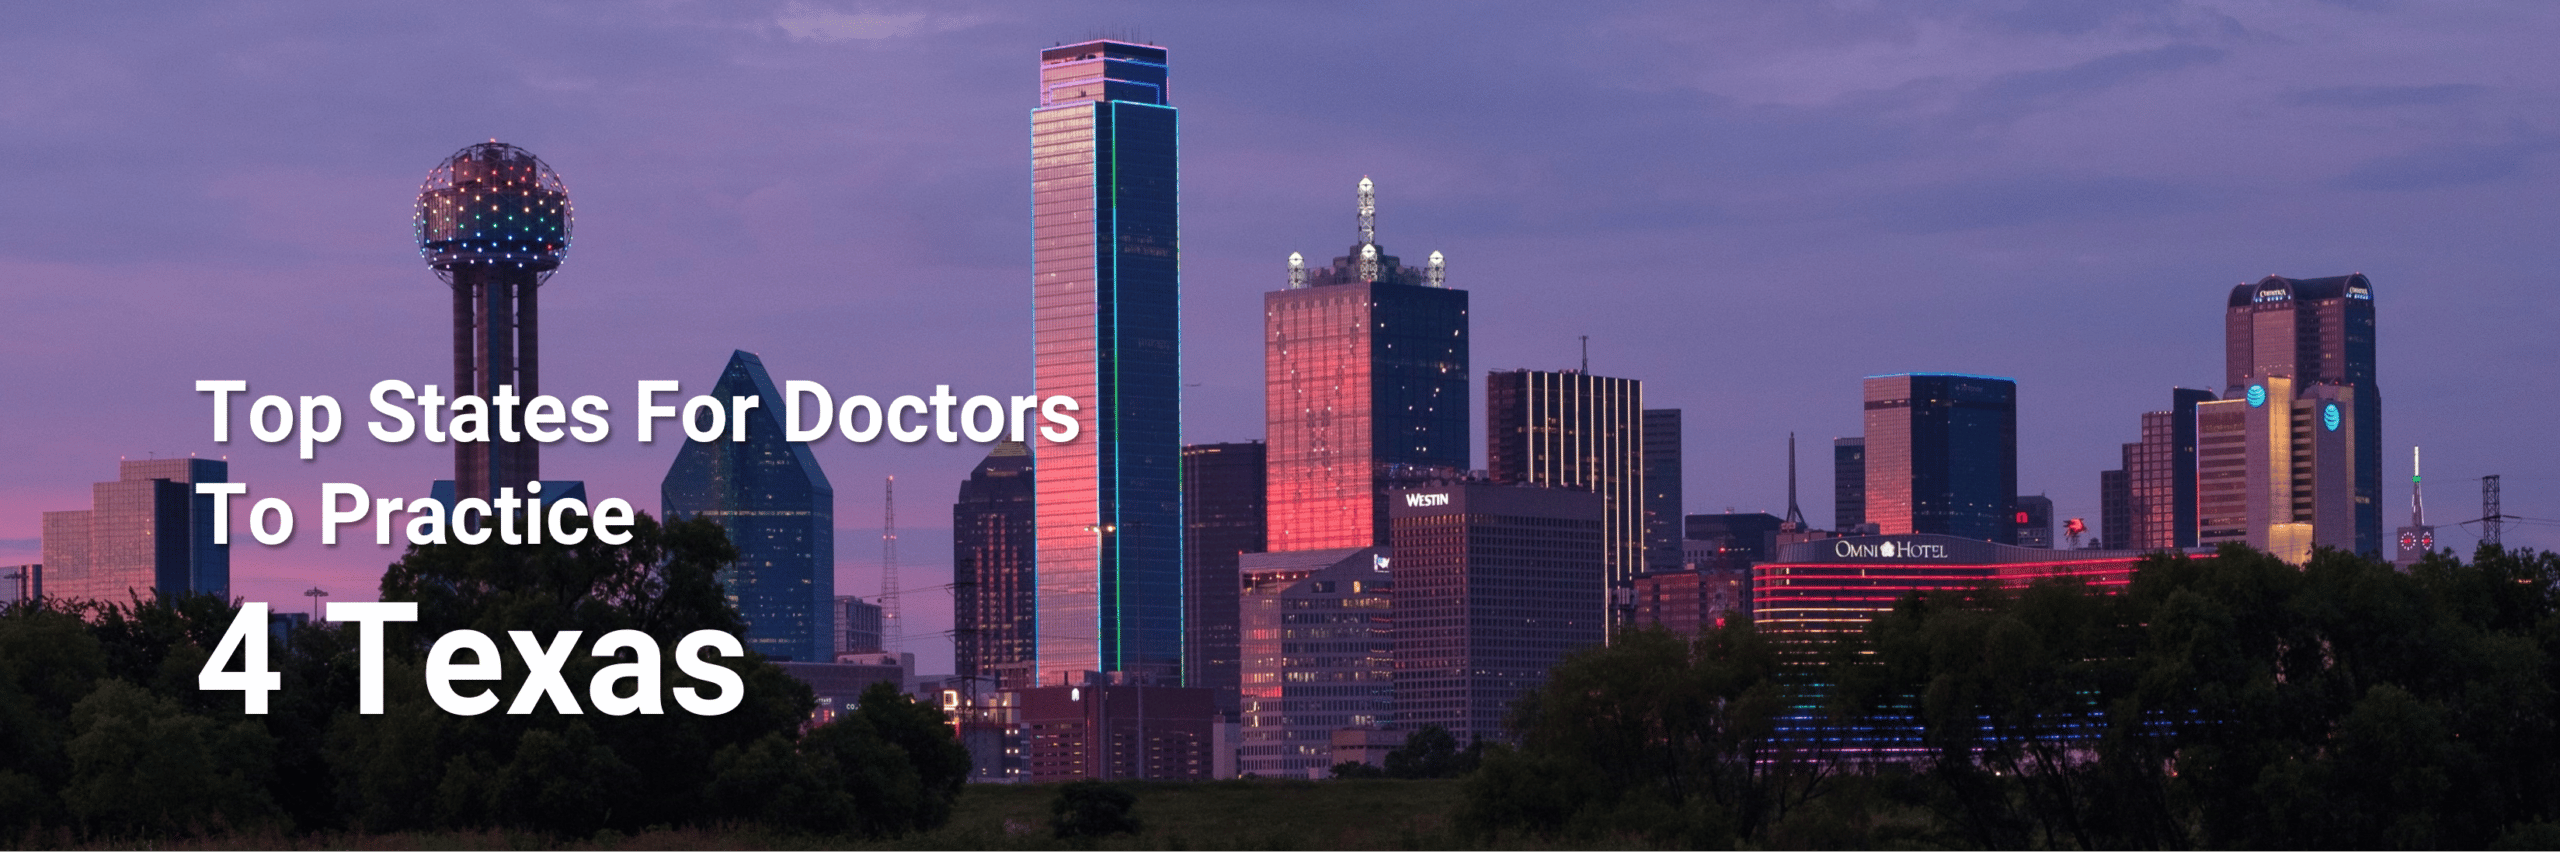 Top States for Doctors to Practice 4 Texas